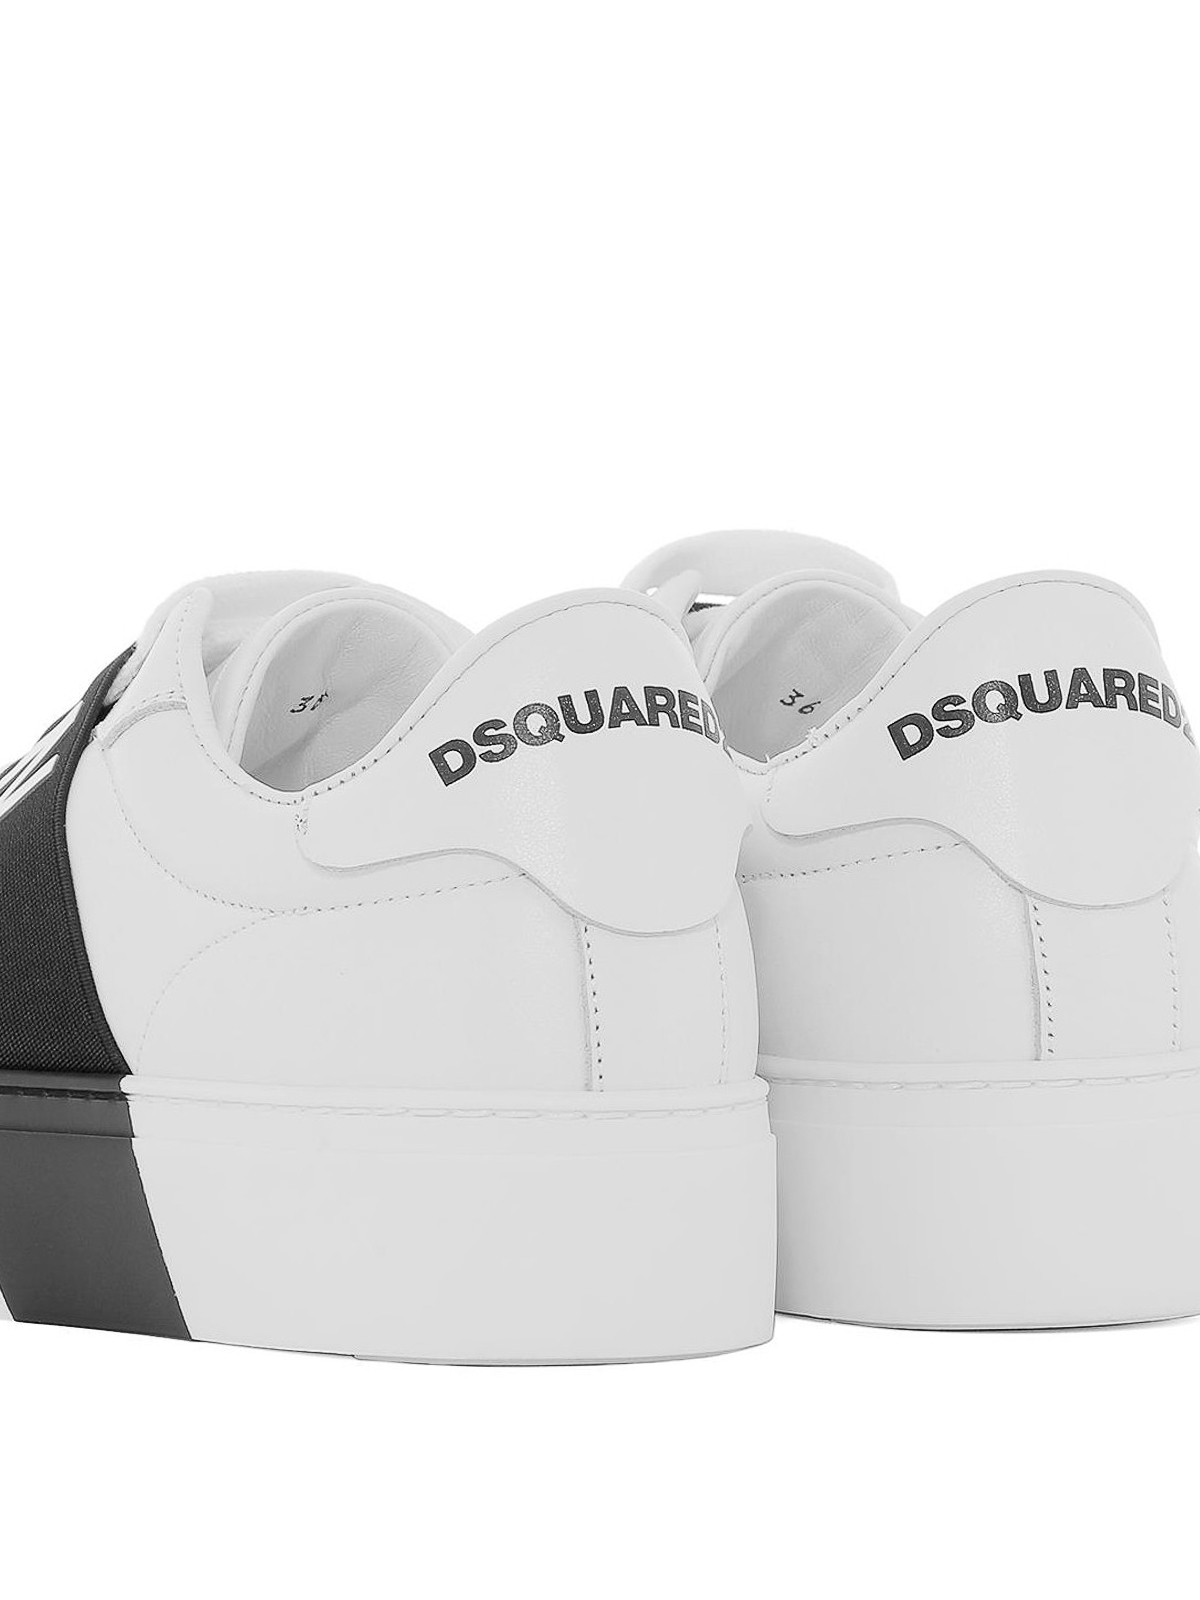 dsquared shoes icon